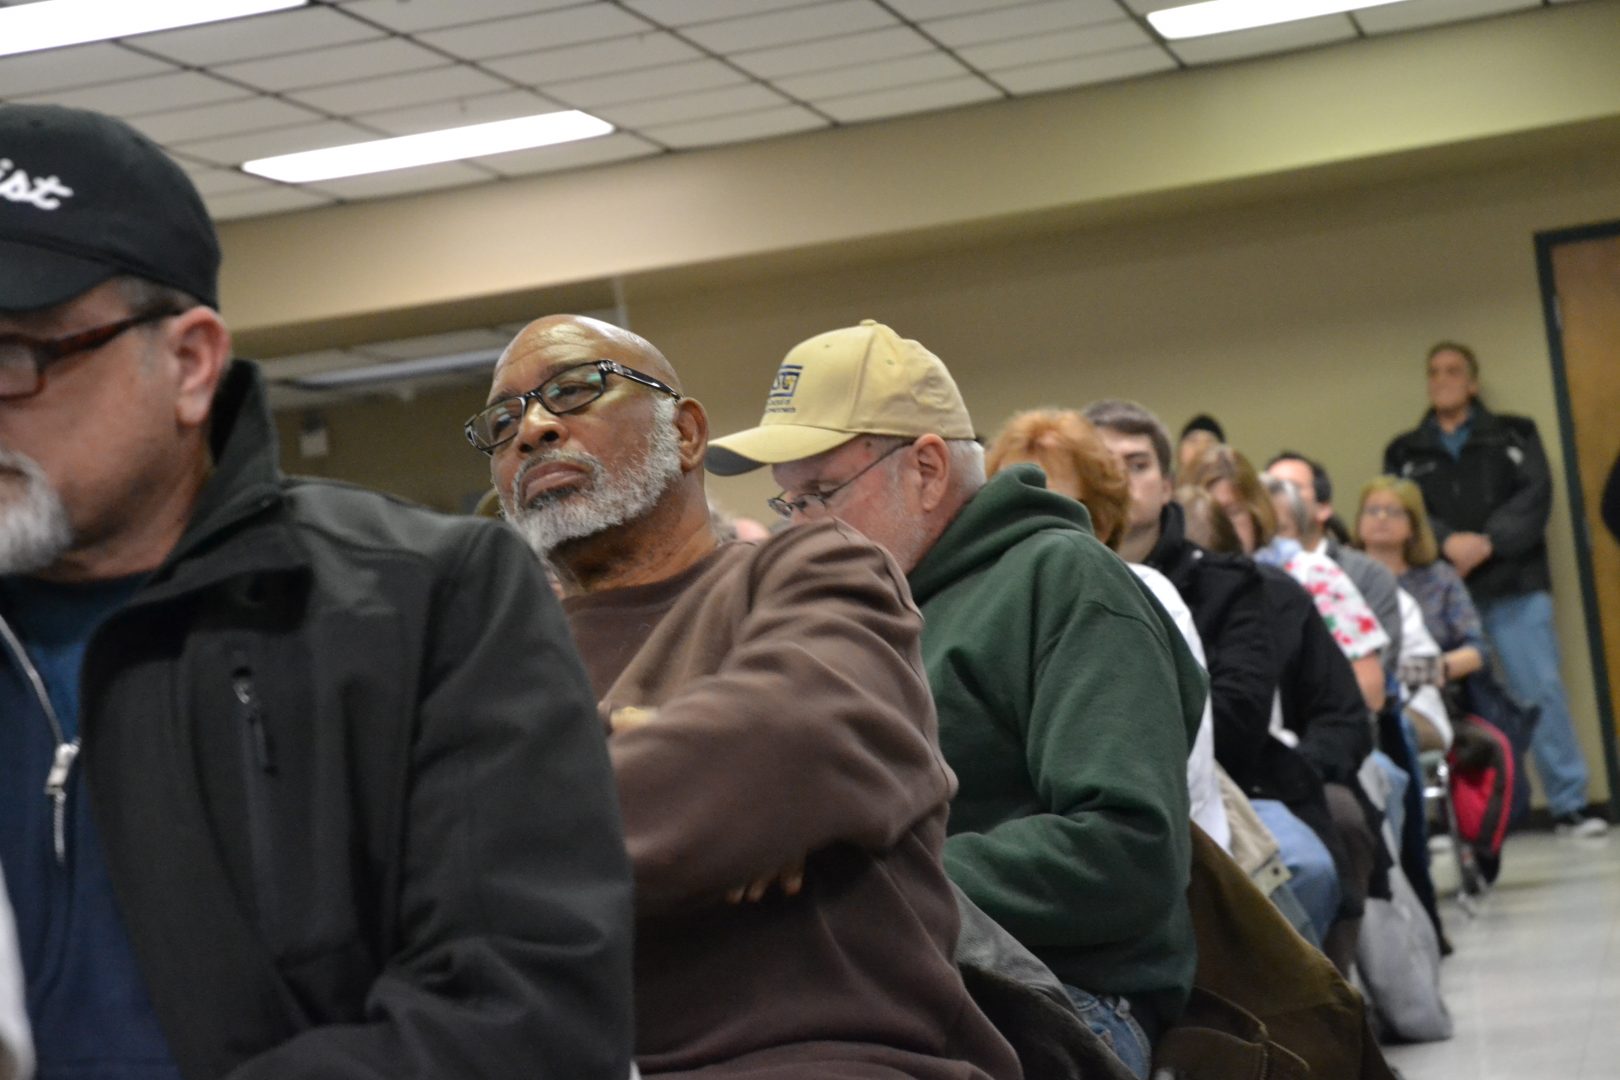 People listen to public comment at a Swatara Township meeting Wed., Dec. 18, 2019.